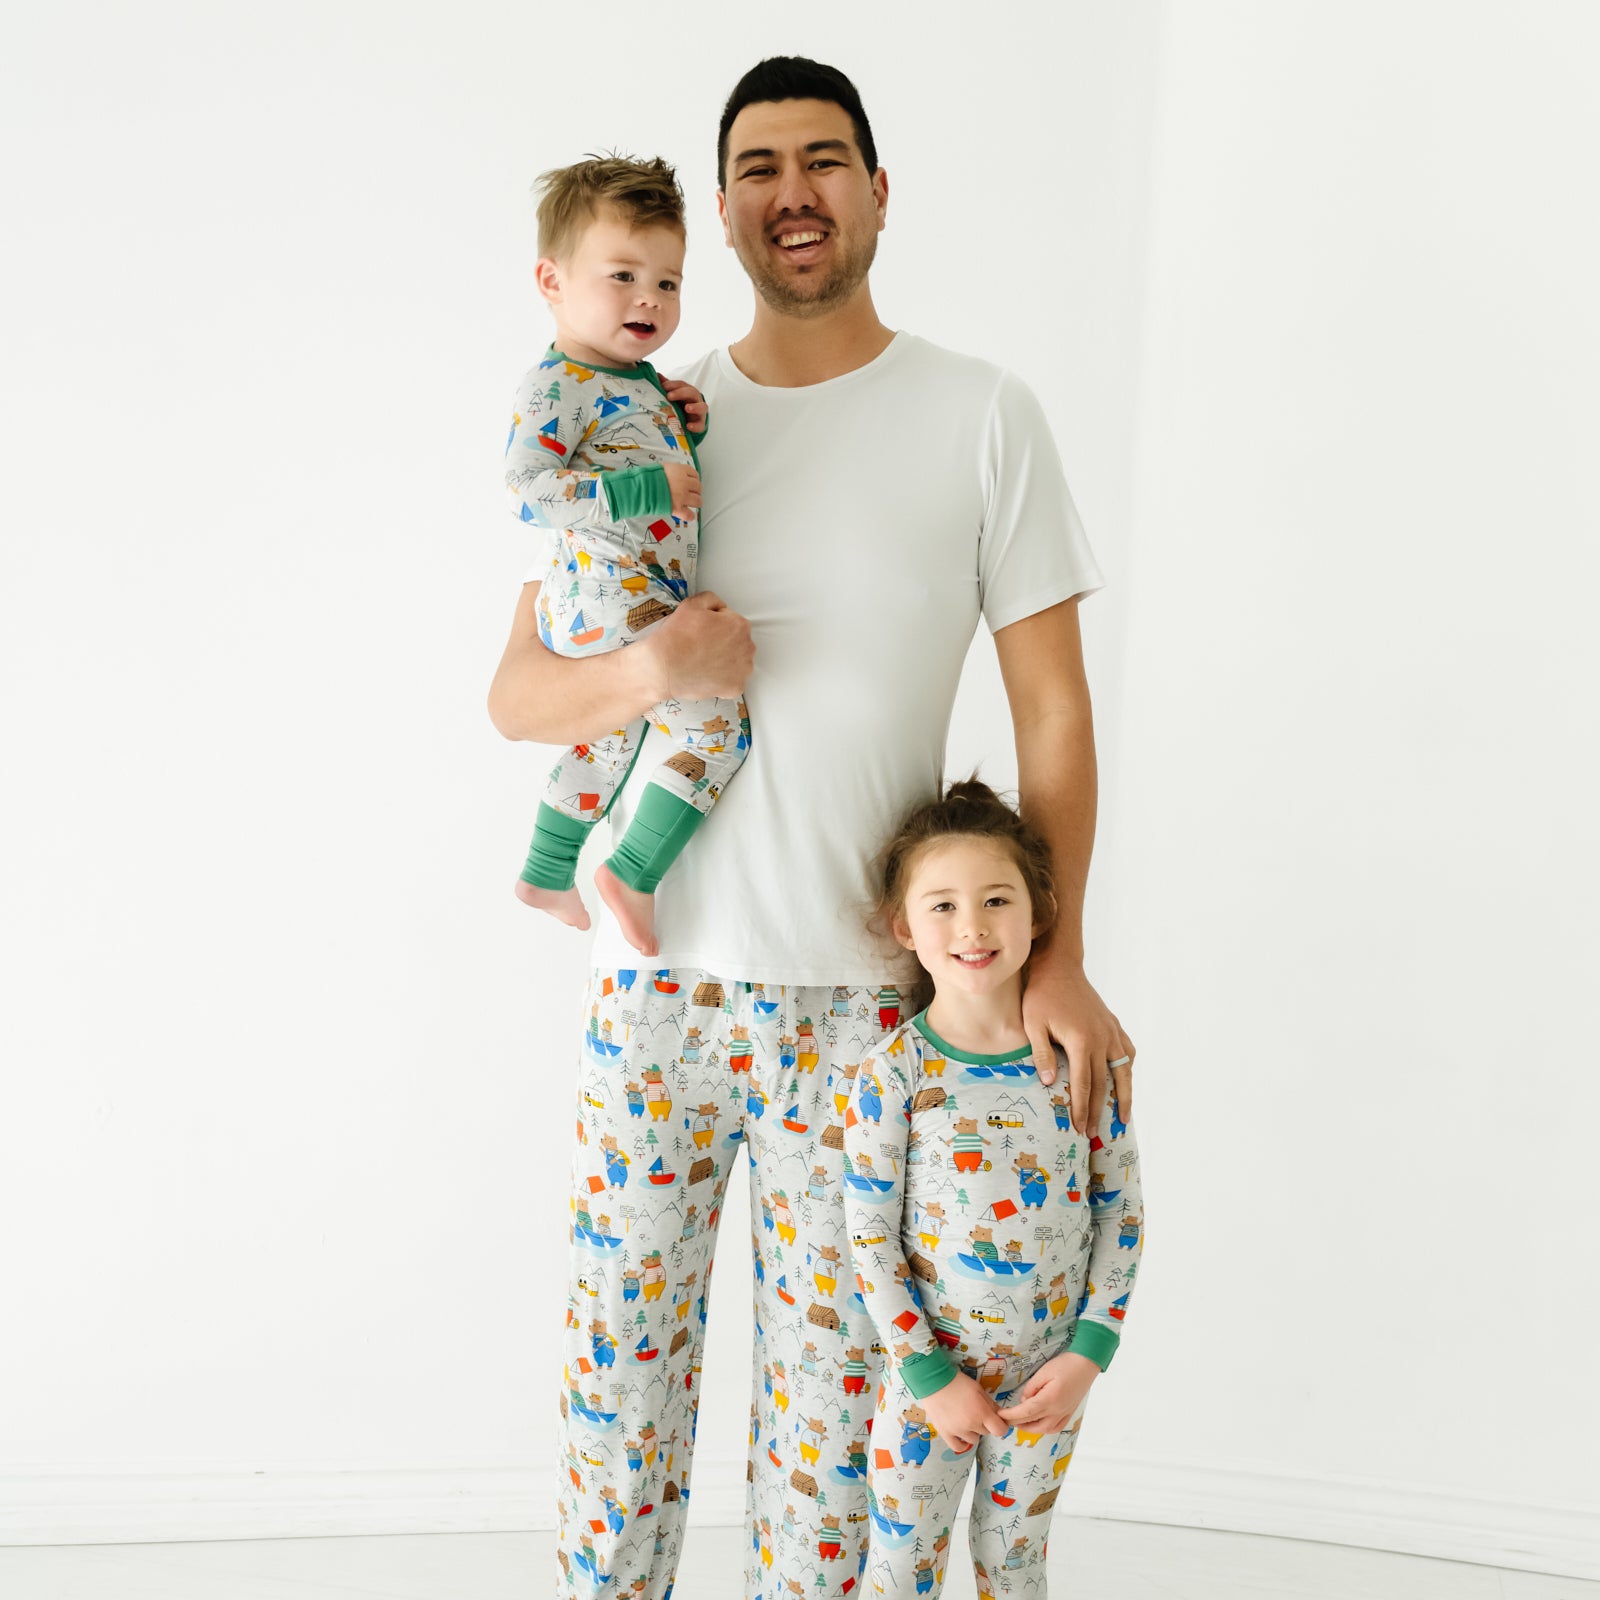 father and children posing together. Dad is wearing a men's bright white pajama top and men's Papa Bear pajama pants. Kids are wearing matching Papa Bear printed pajamas in zippy and two piece styles